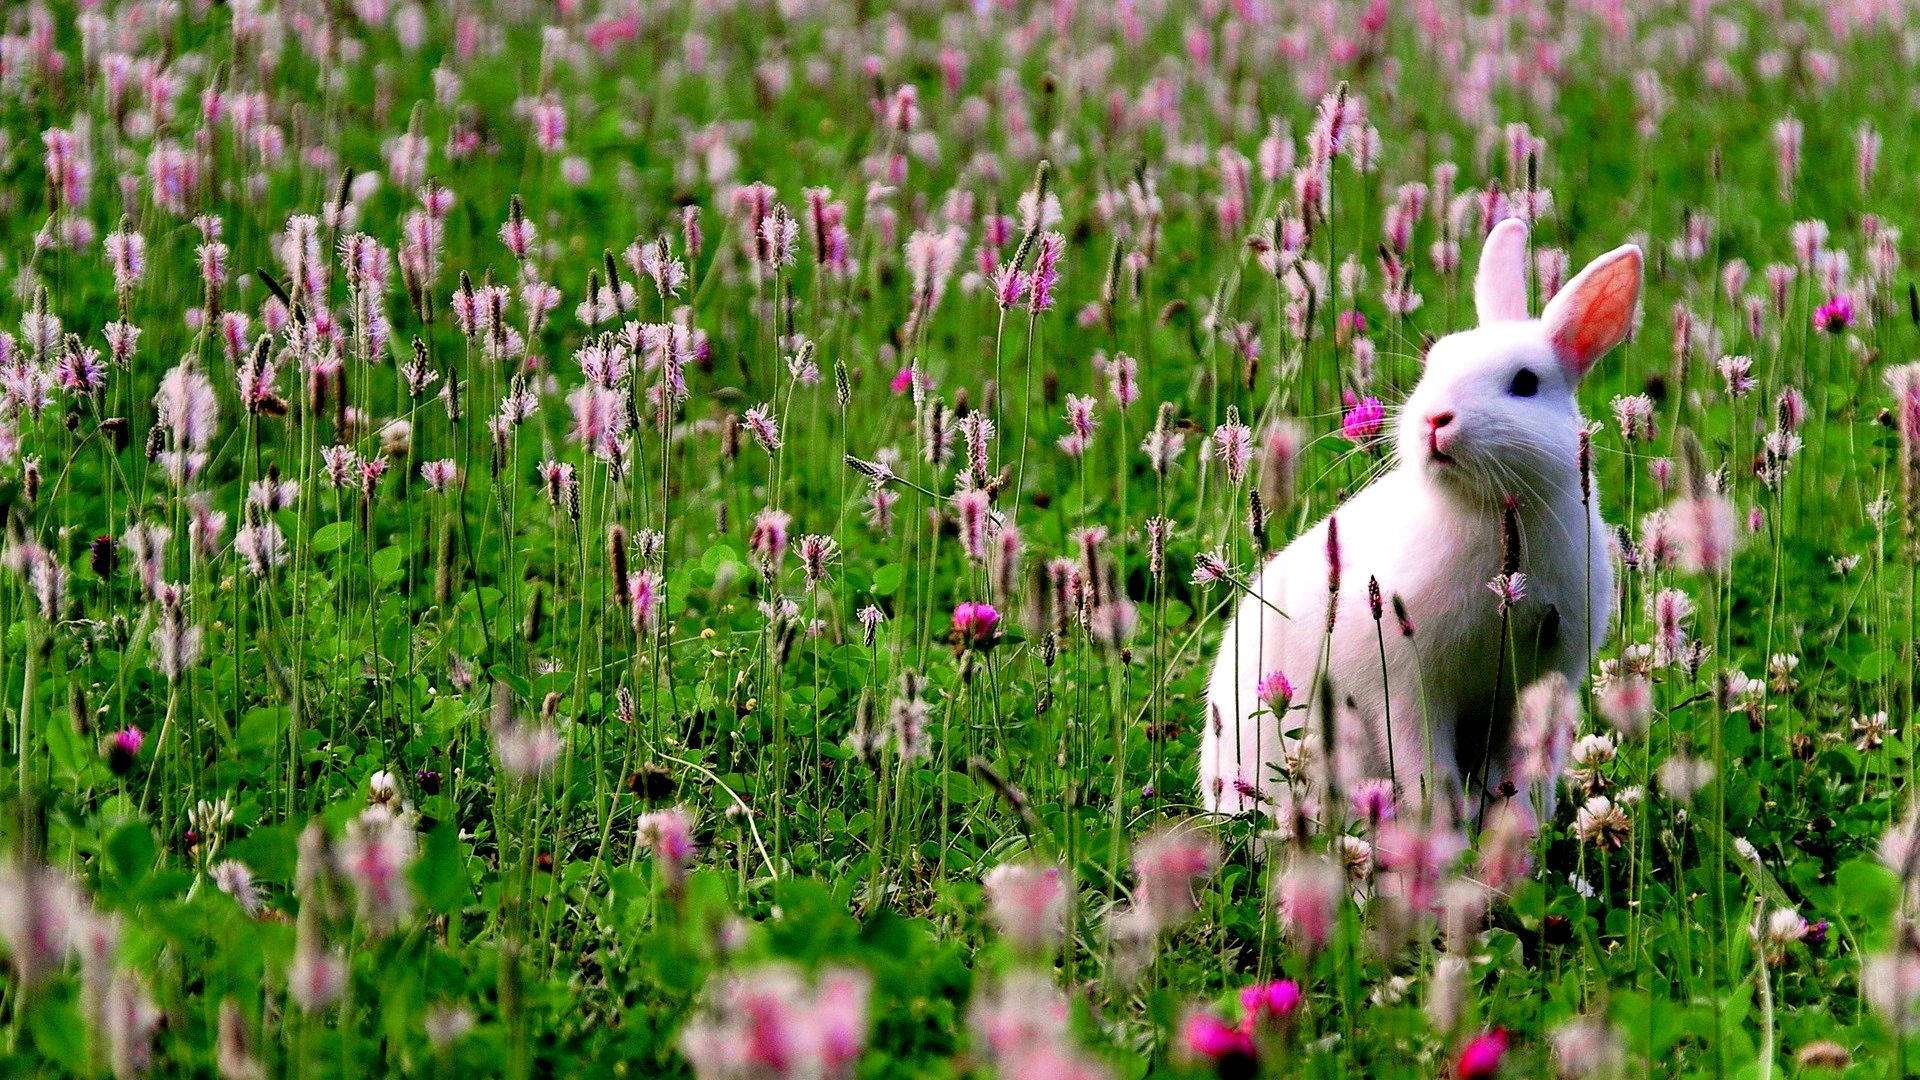 A Cute Bunny Bounding Through A Flowery Meadow Background